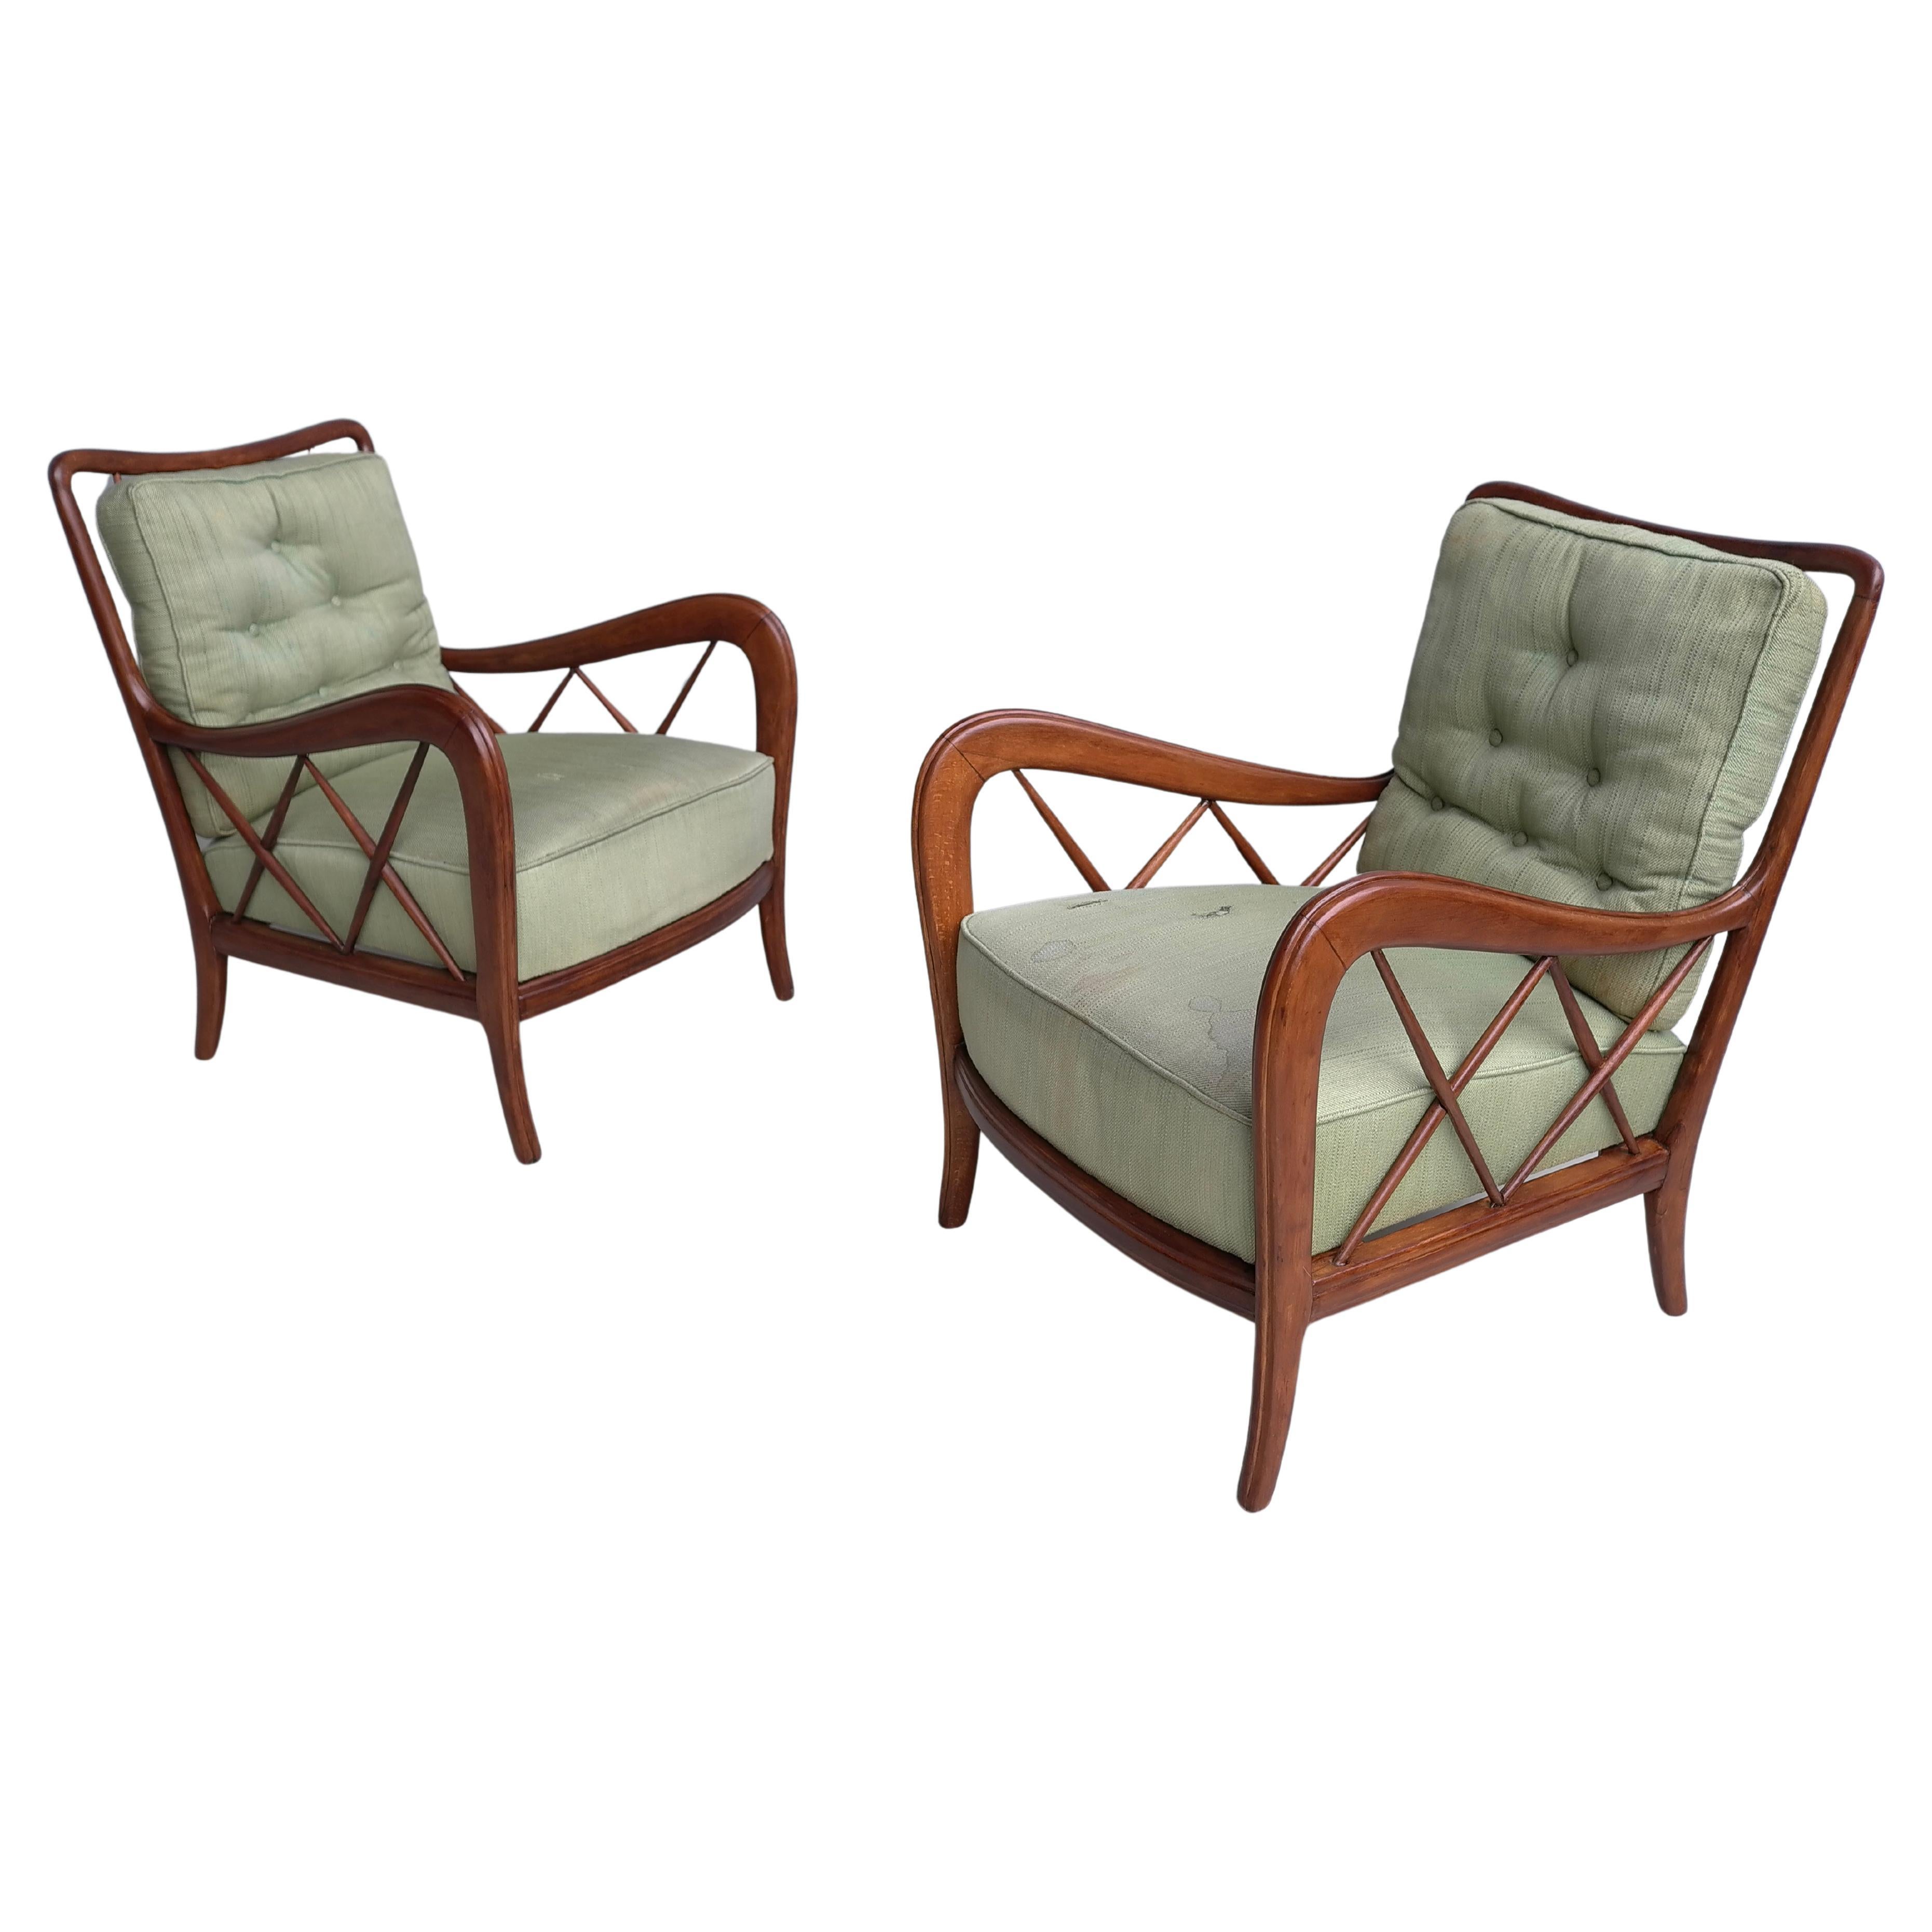 Walnut Wooden Lounge Chairs attr Paolo Buffa, Milan Italy 1940's For Sale